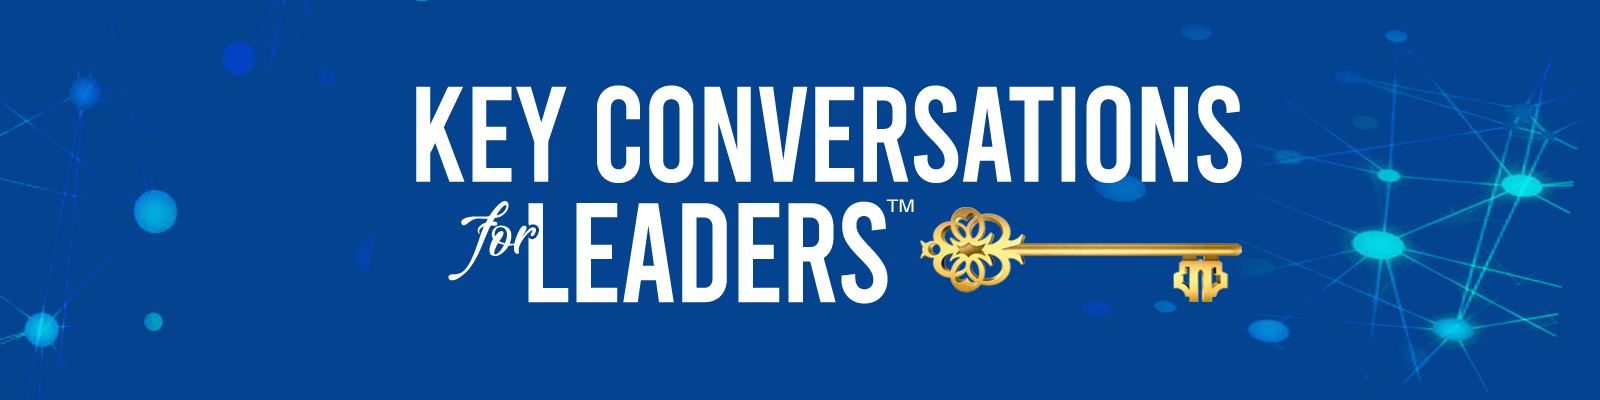 Key Conversations for Leaders